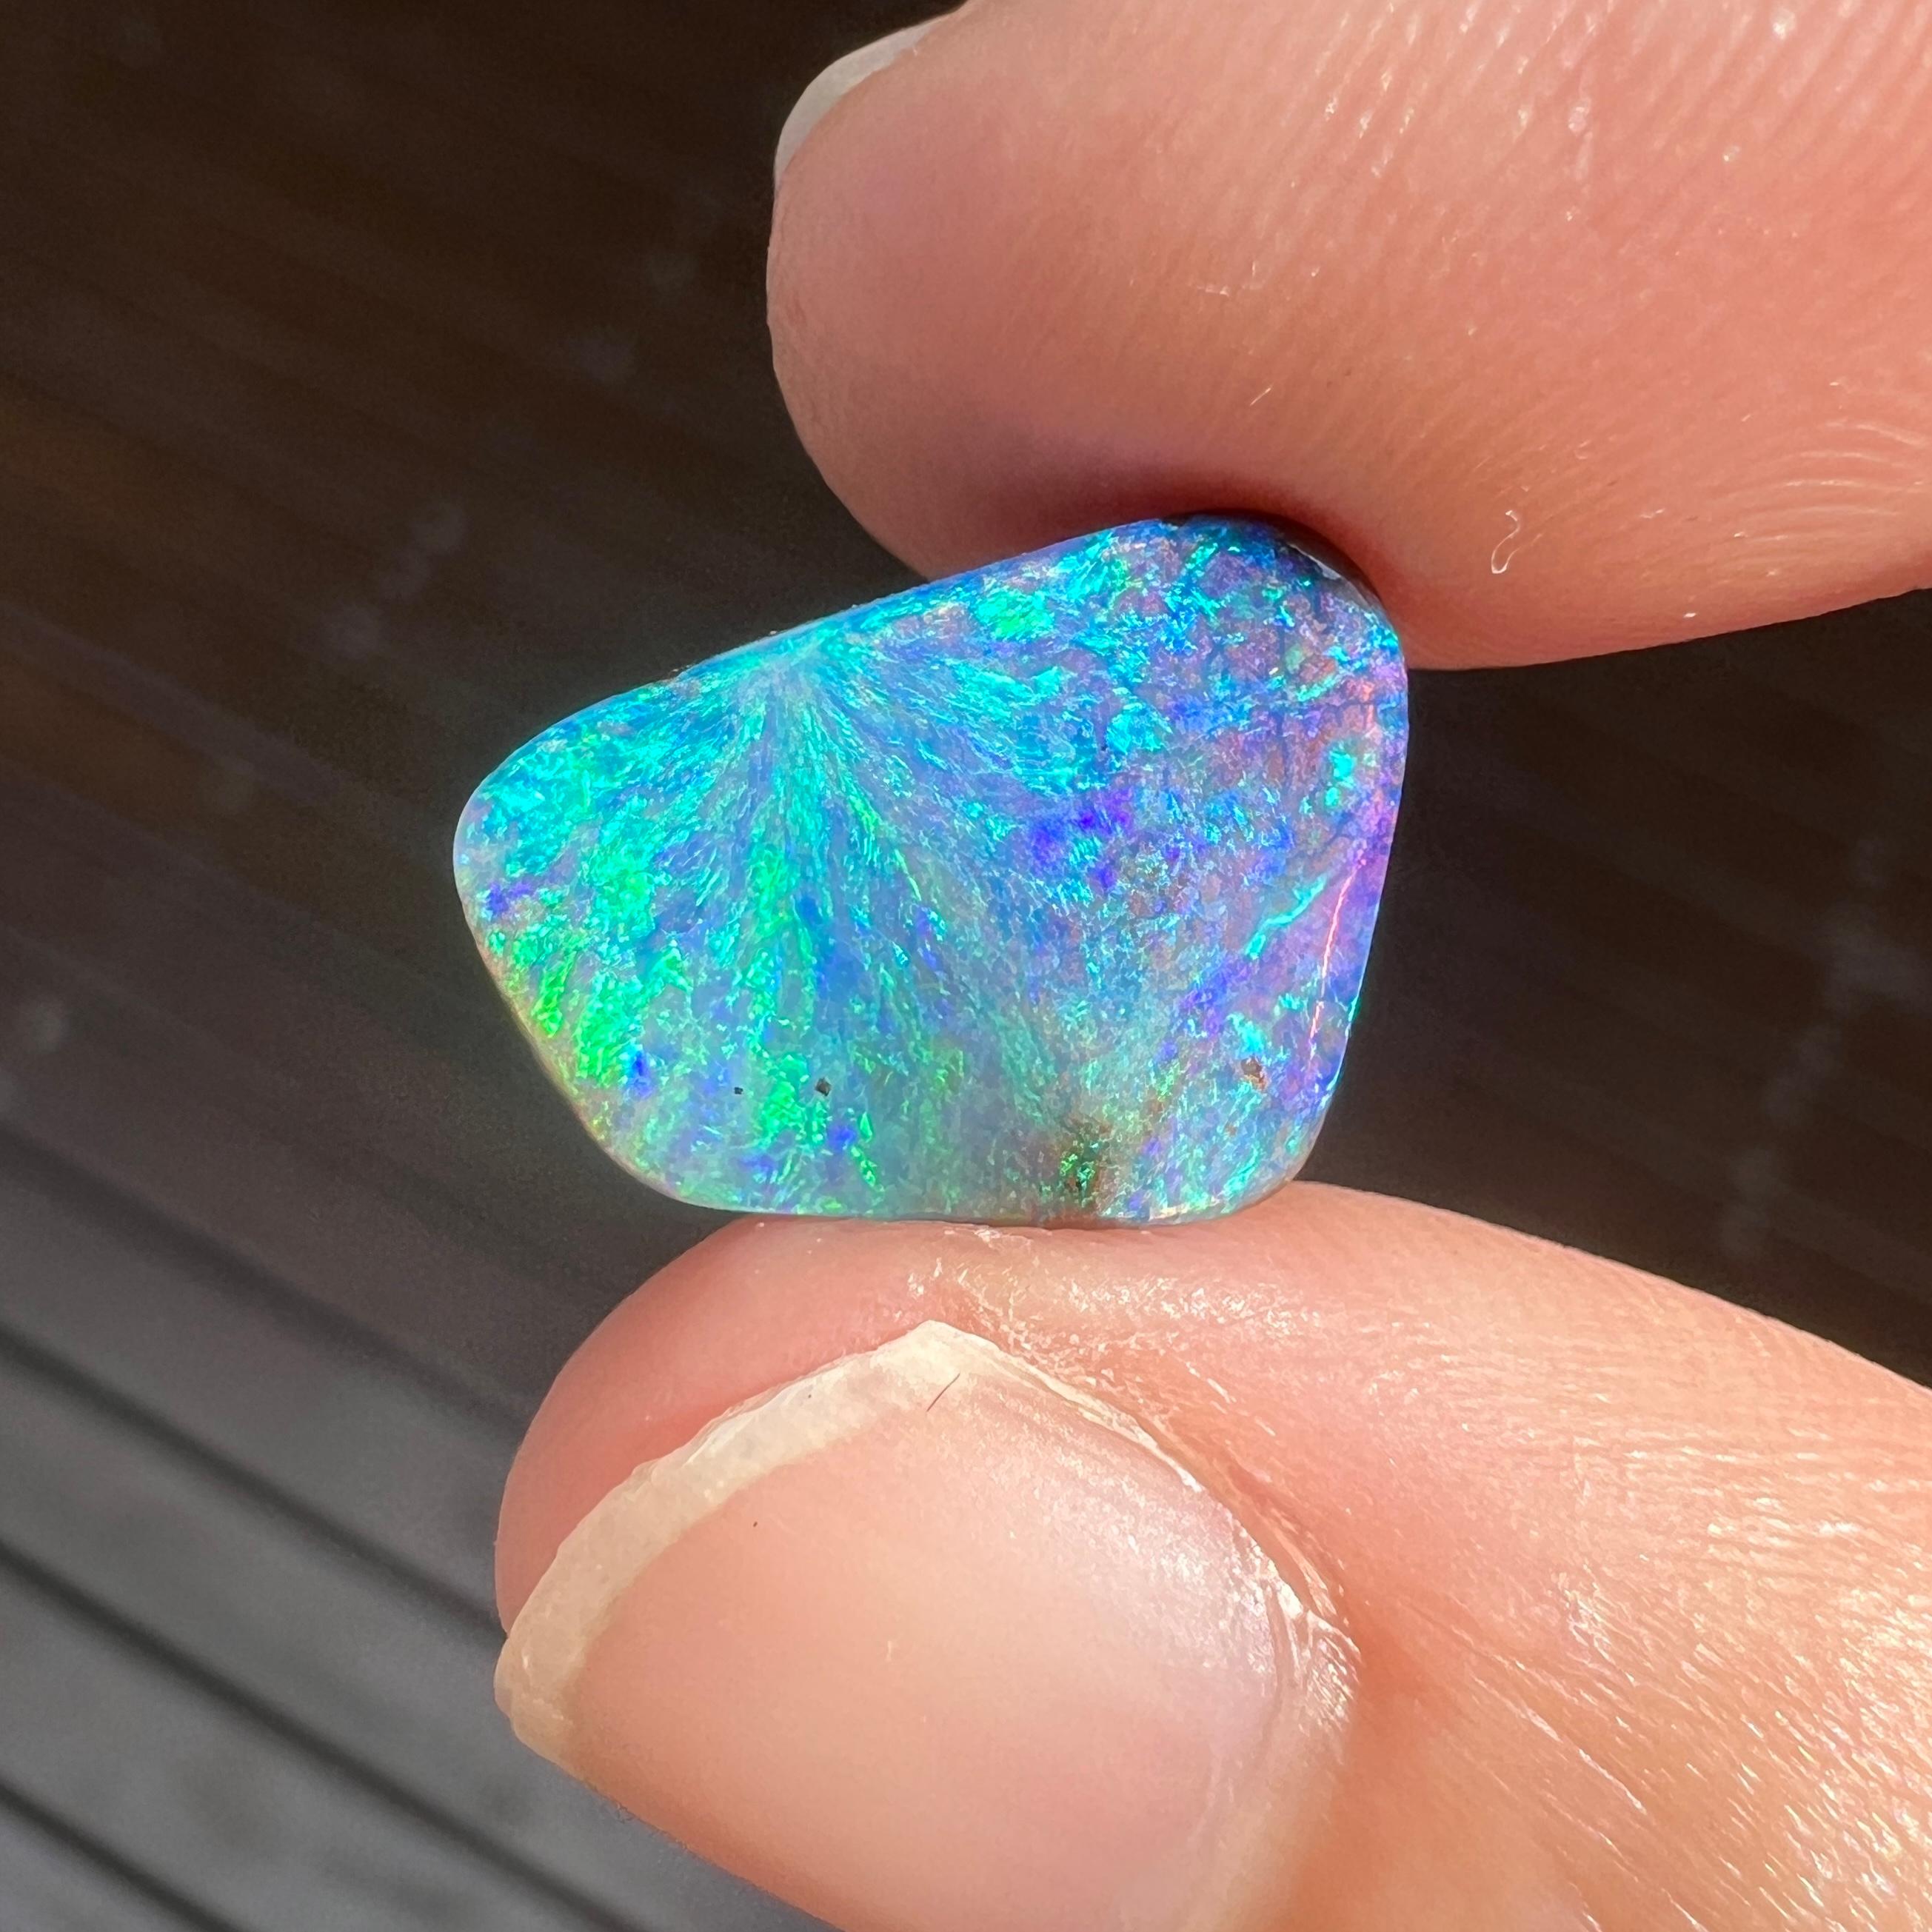 This beautiful 4.98 Ct Australian boulder opal was mined by Sue Cooper at her Yaraka opal mine in western Queensland, Australia in 2021. Sue processed the rough opal herself and cut into into an organic, free-form shape. We especially love the blue,